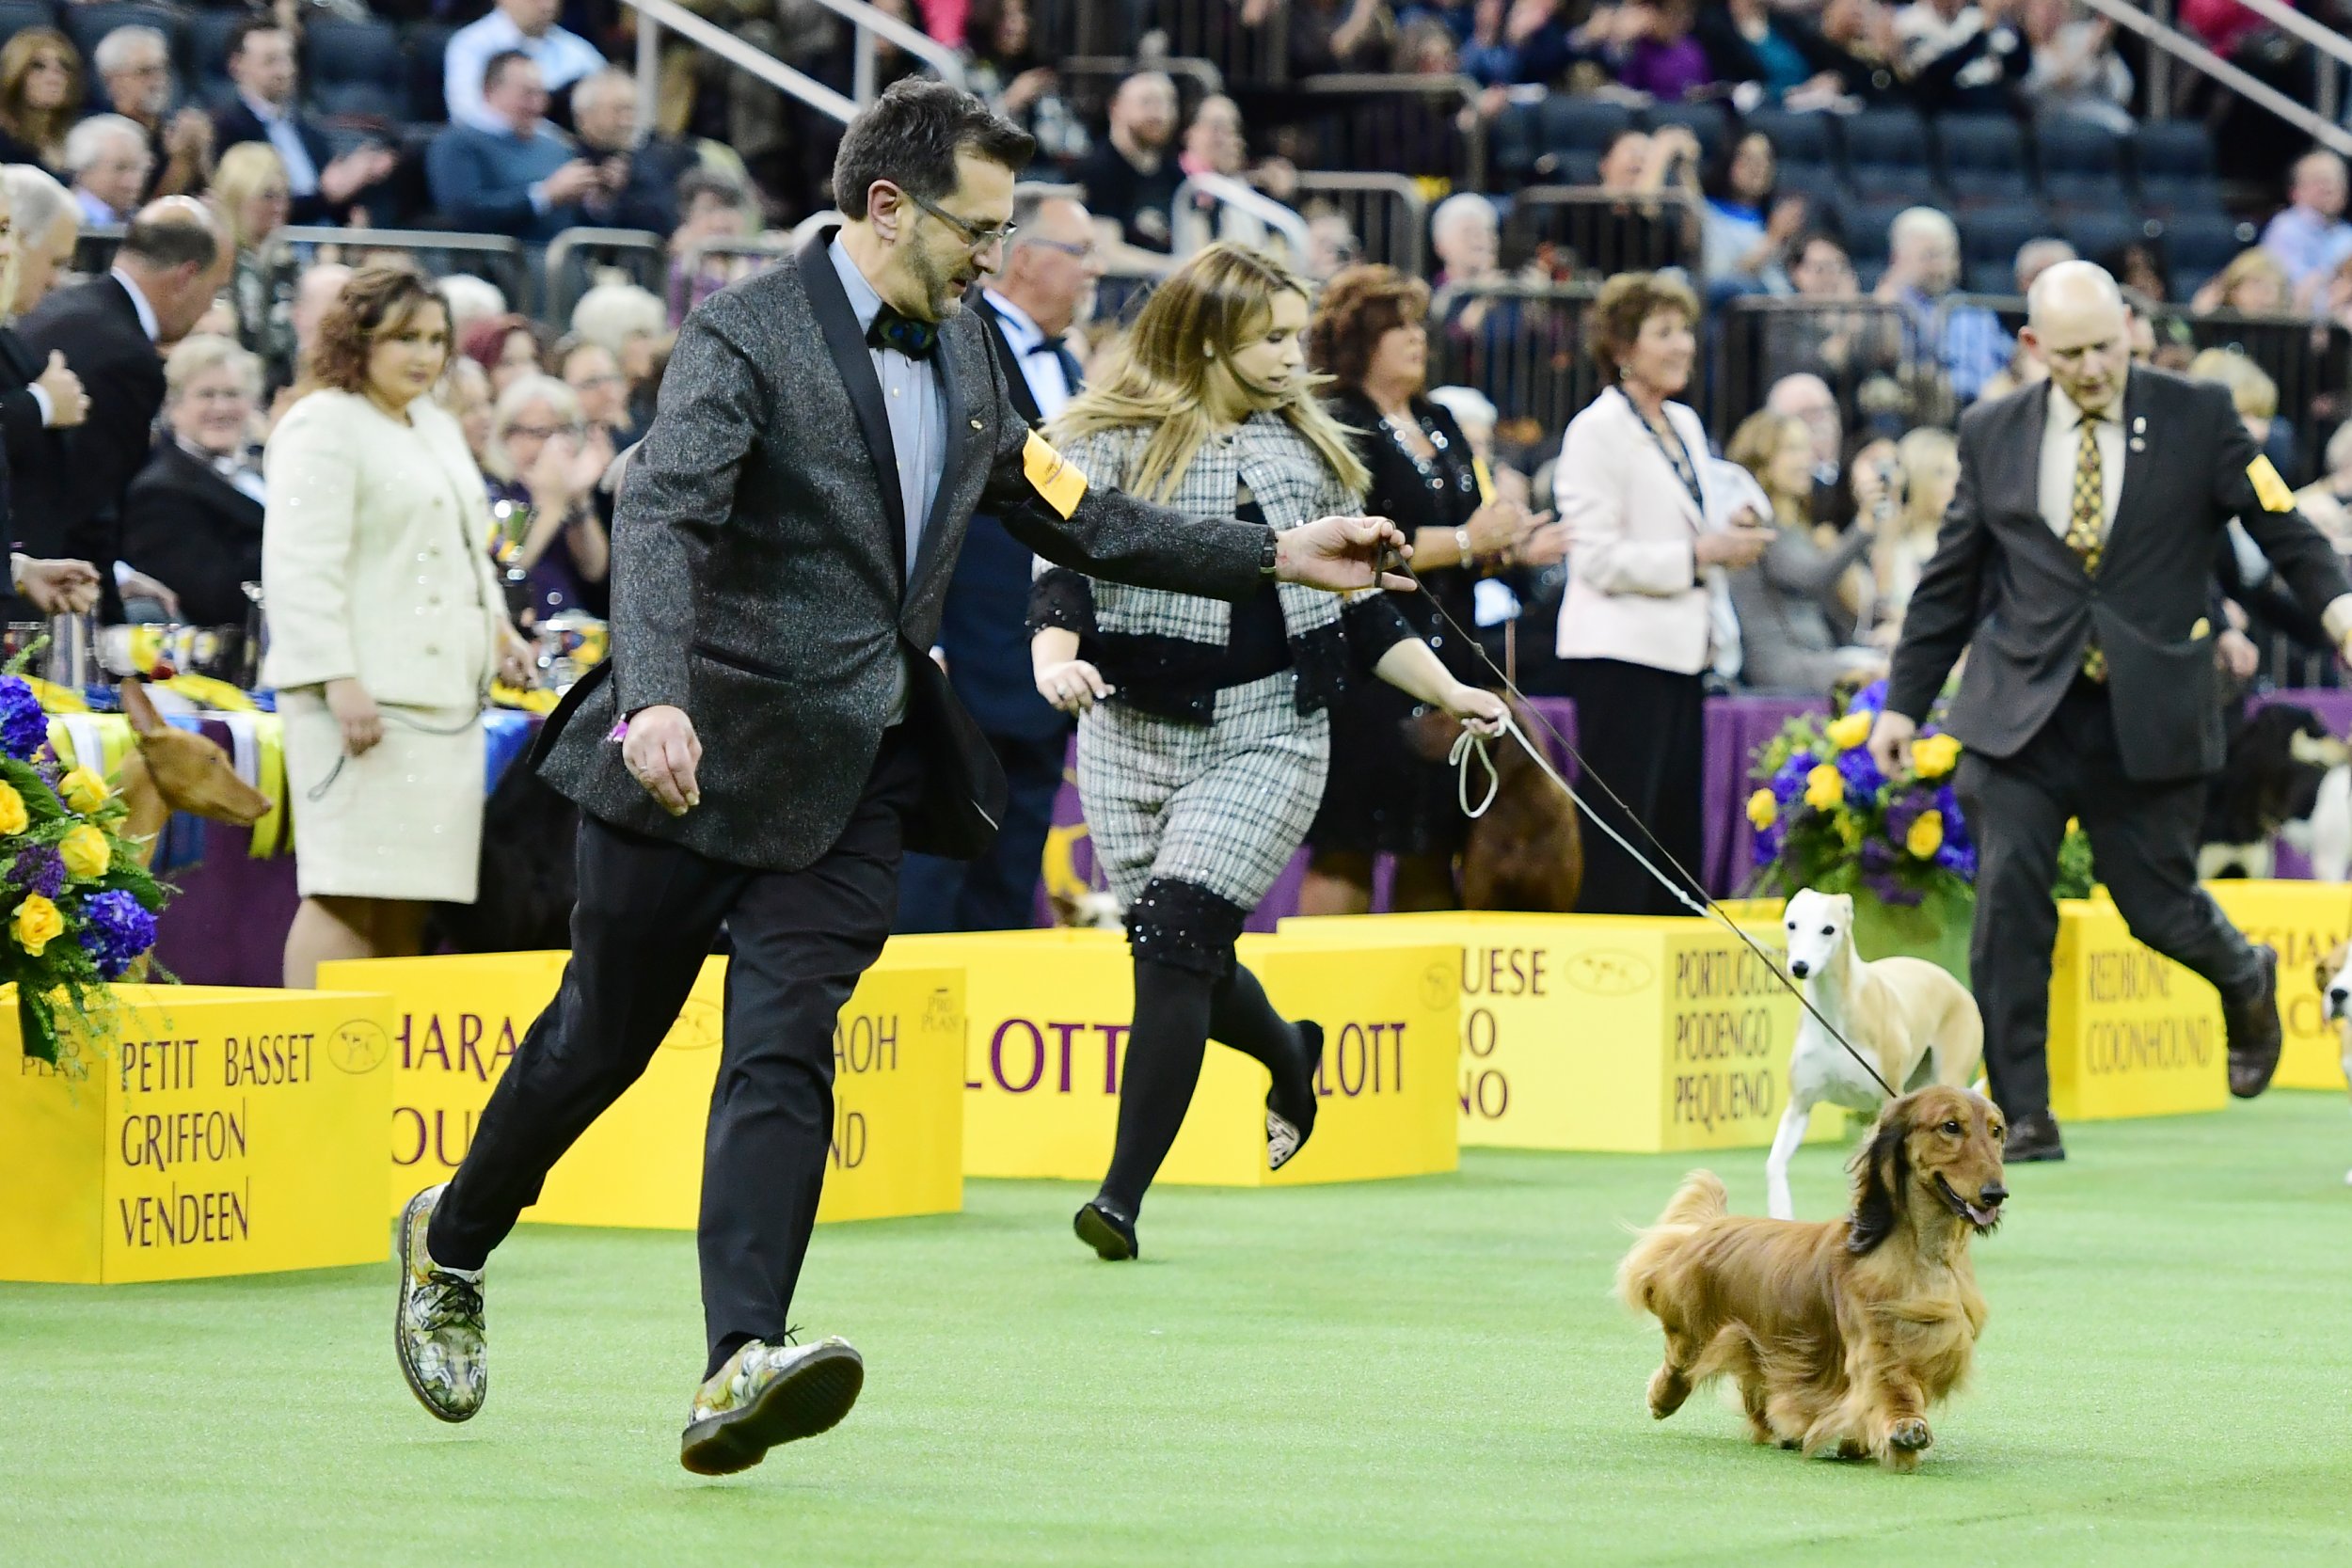 Best in Show Westminster 2019 Live Stream How to Watch Online, Time